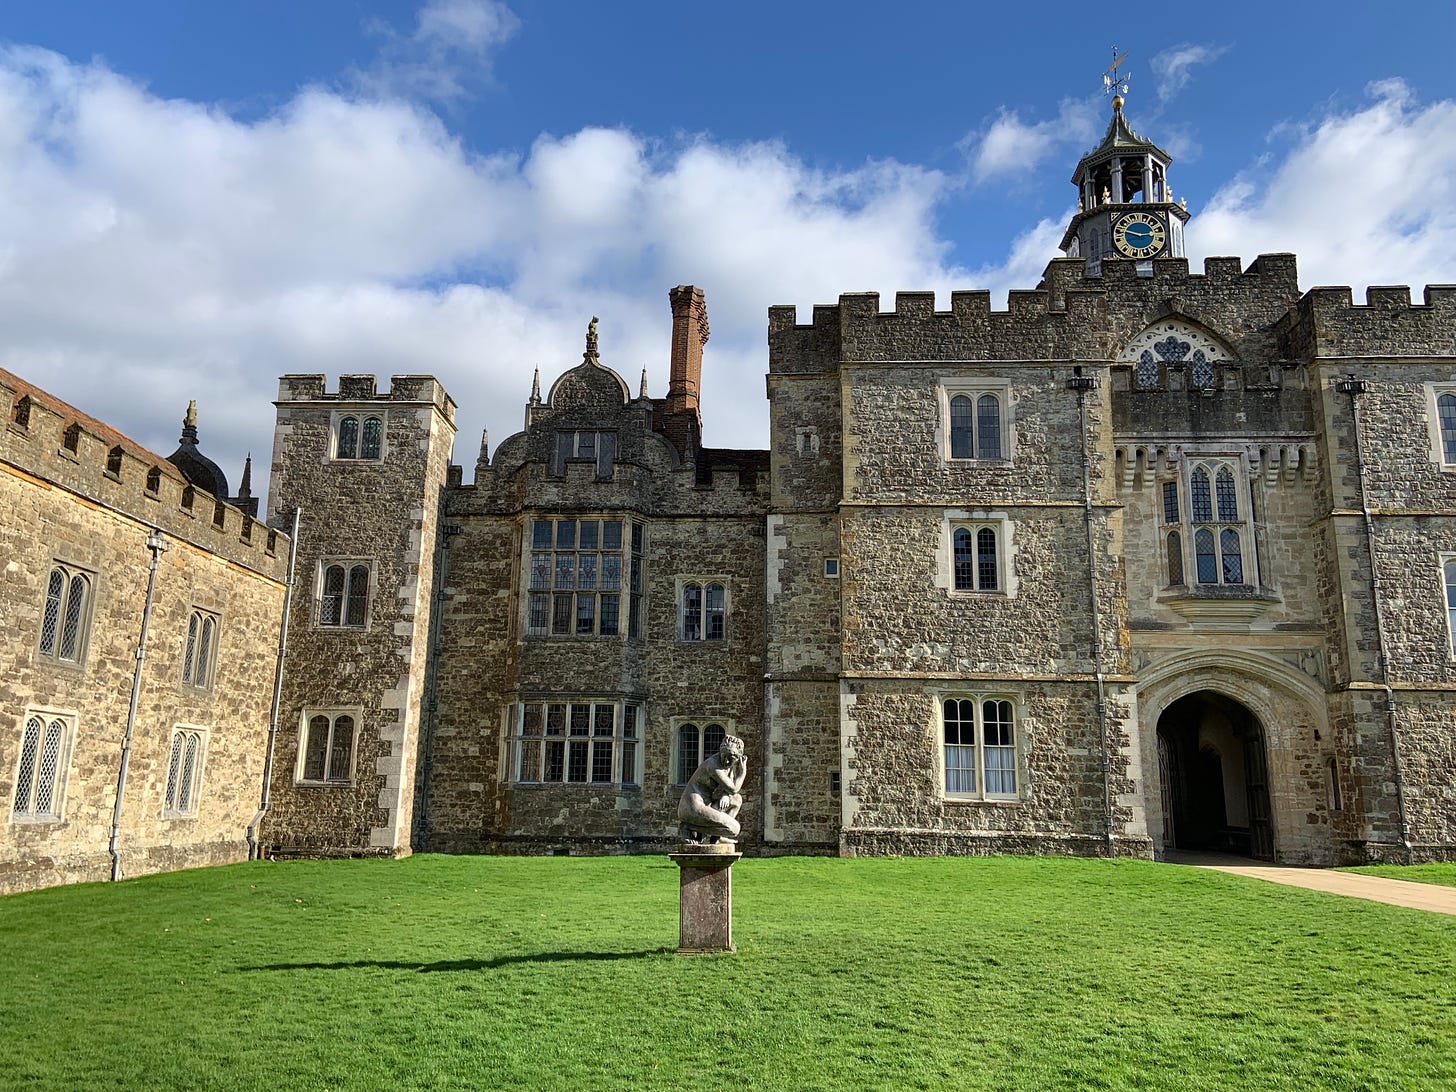 photo of the courtyard at Knole, including a grassy lawn with a nude sculpture of a woman, the English mansion sits behind it